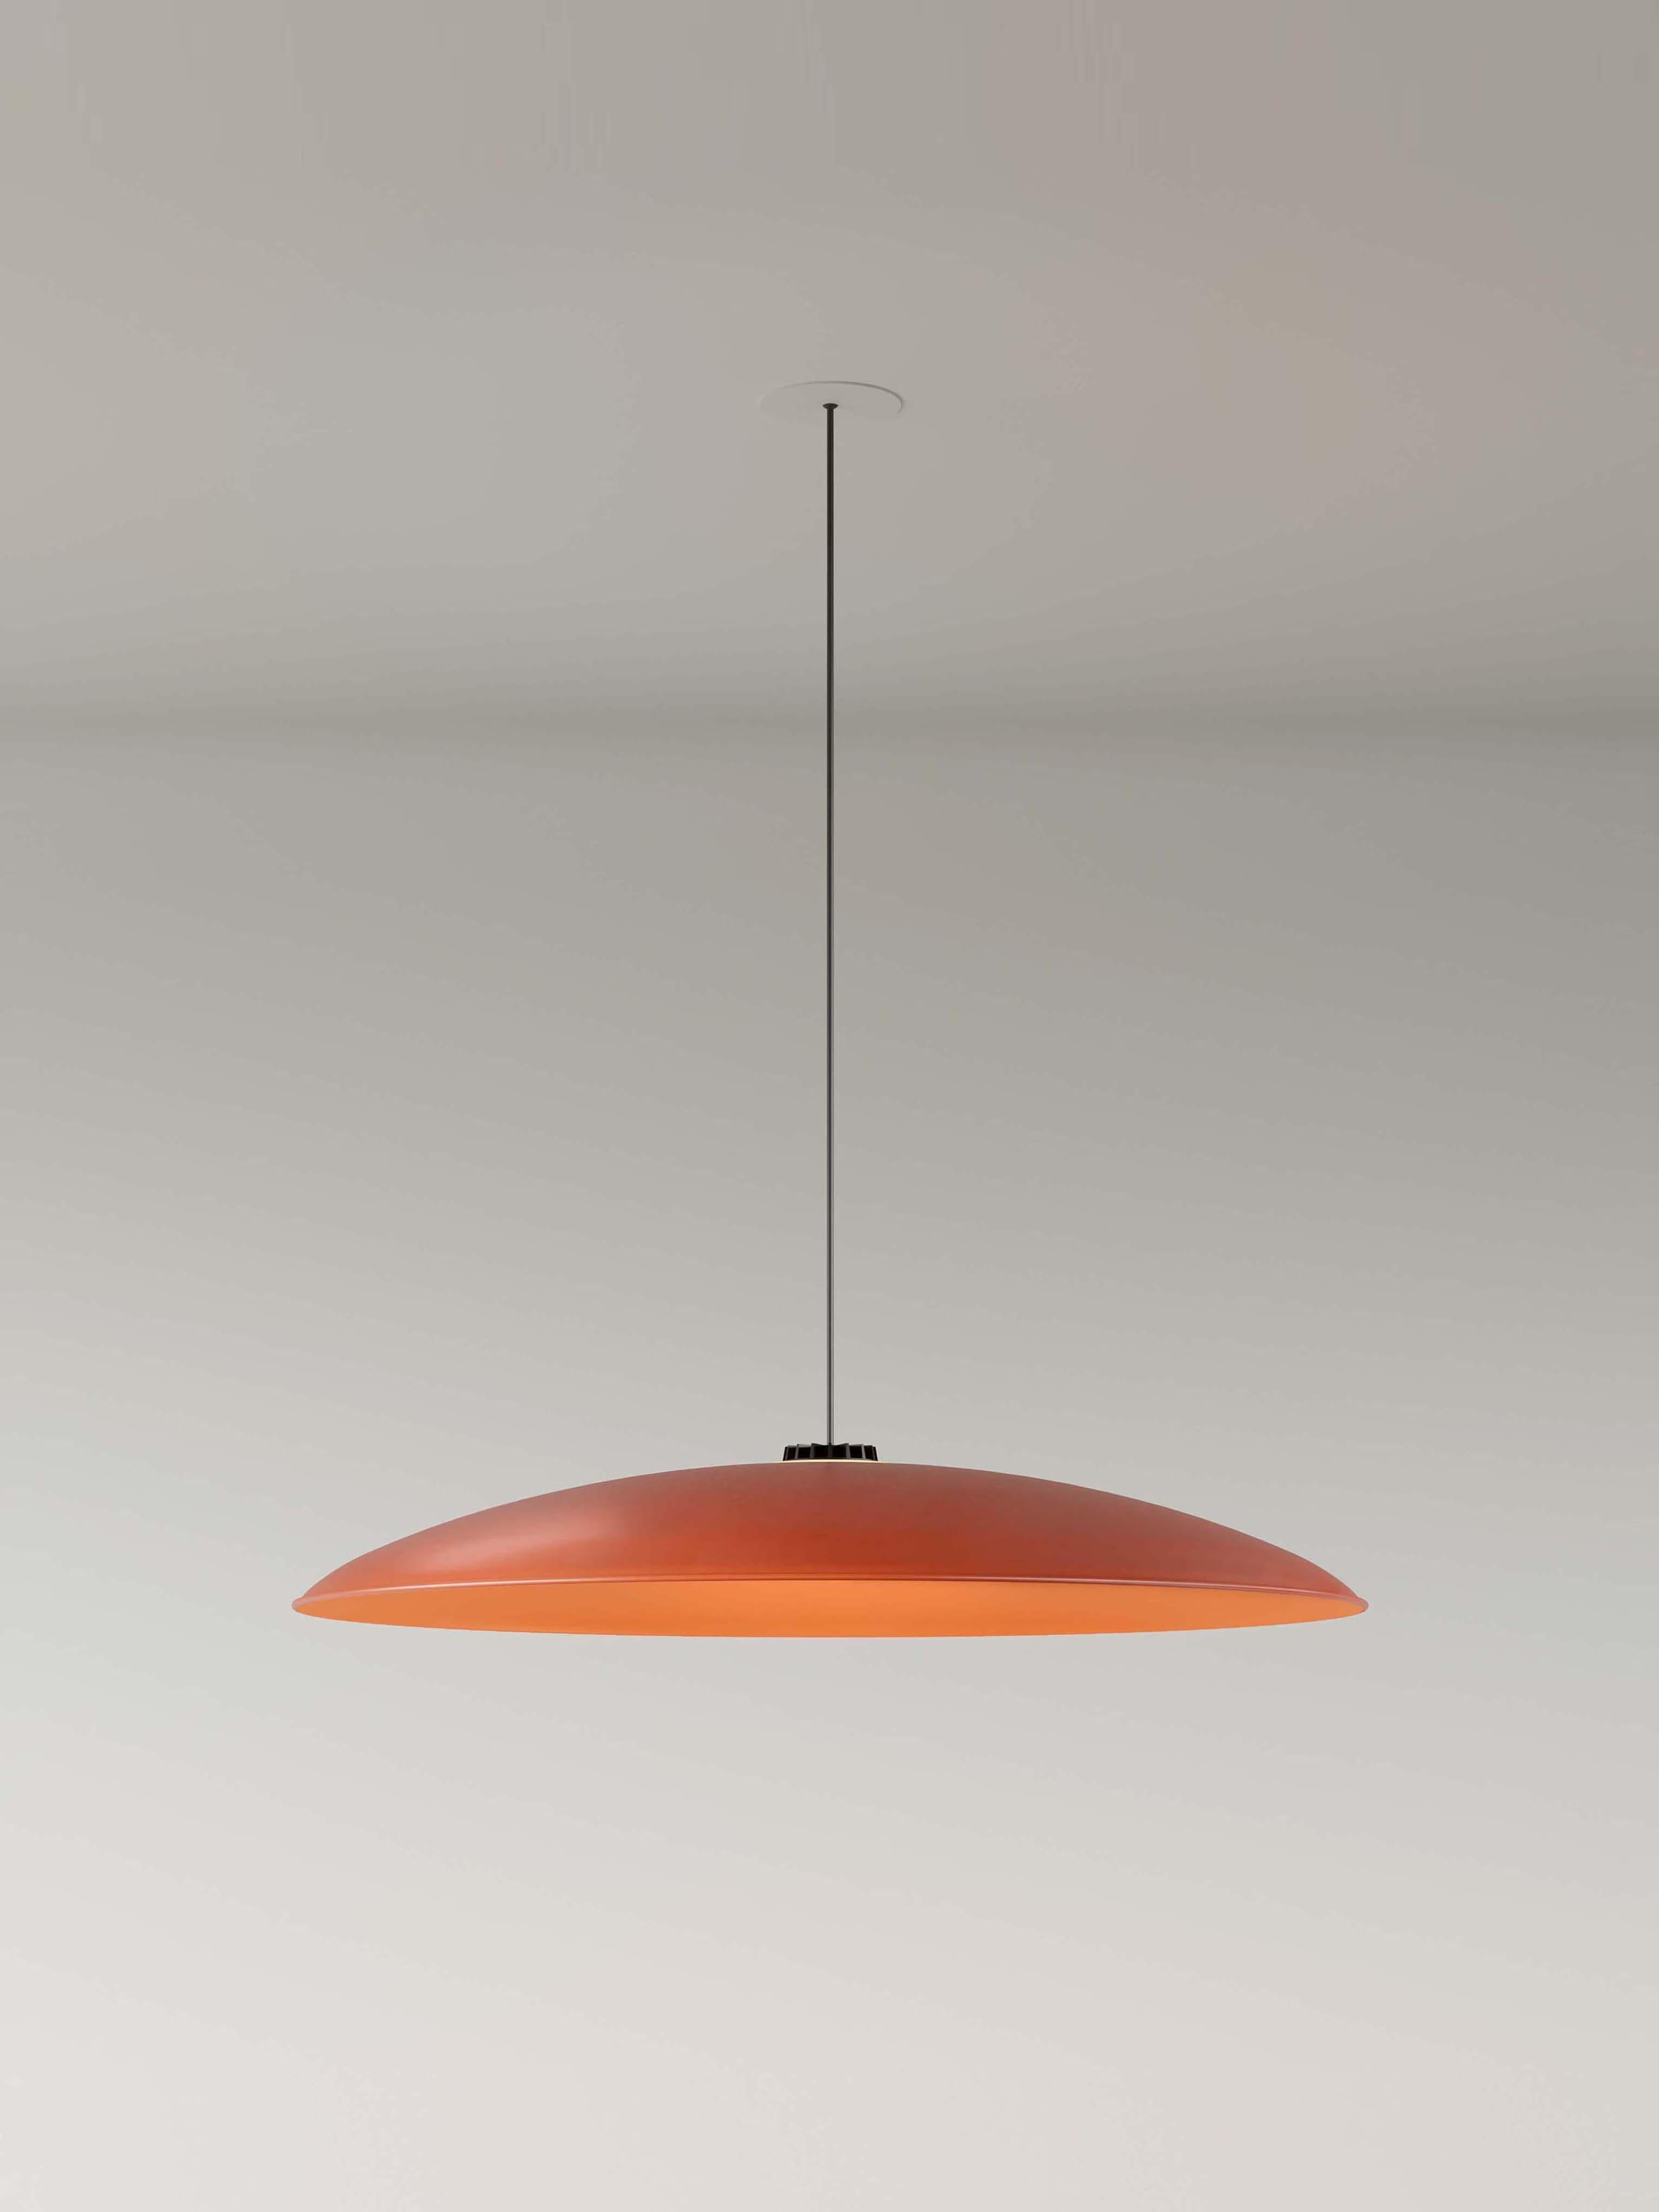 Large red headhat plate pendant lamp by Santa & Cole
Dimensions: D 75 x H 11 cm
Materials: Metal.
Cable lenght: 3mts.
Available in other colors and sizes. Available in 2 cable lengths: 3mts, 8mts.
Availalble in 2 canopy colors: black or